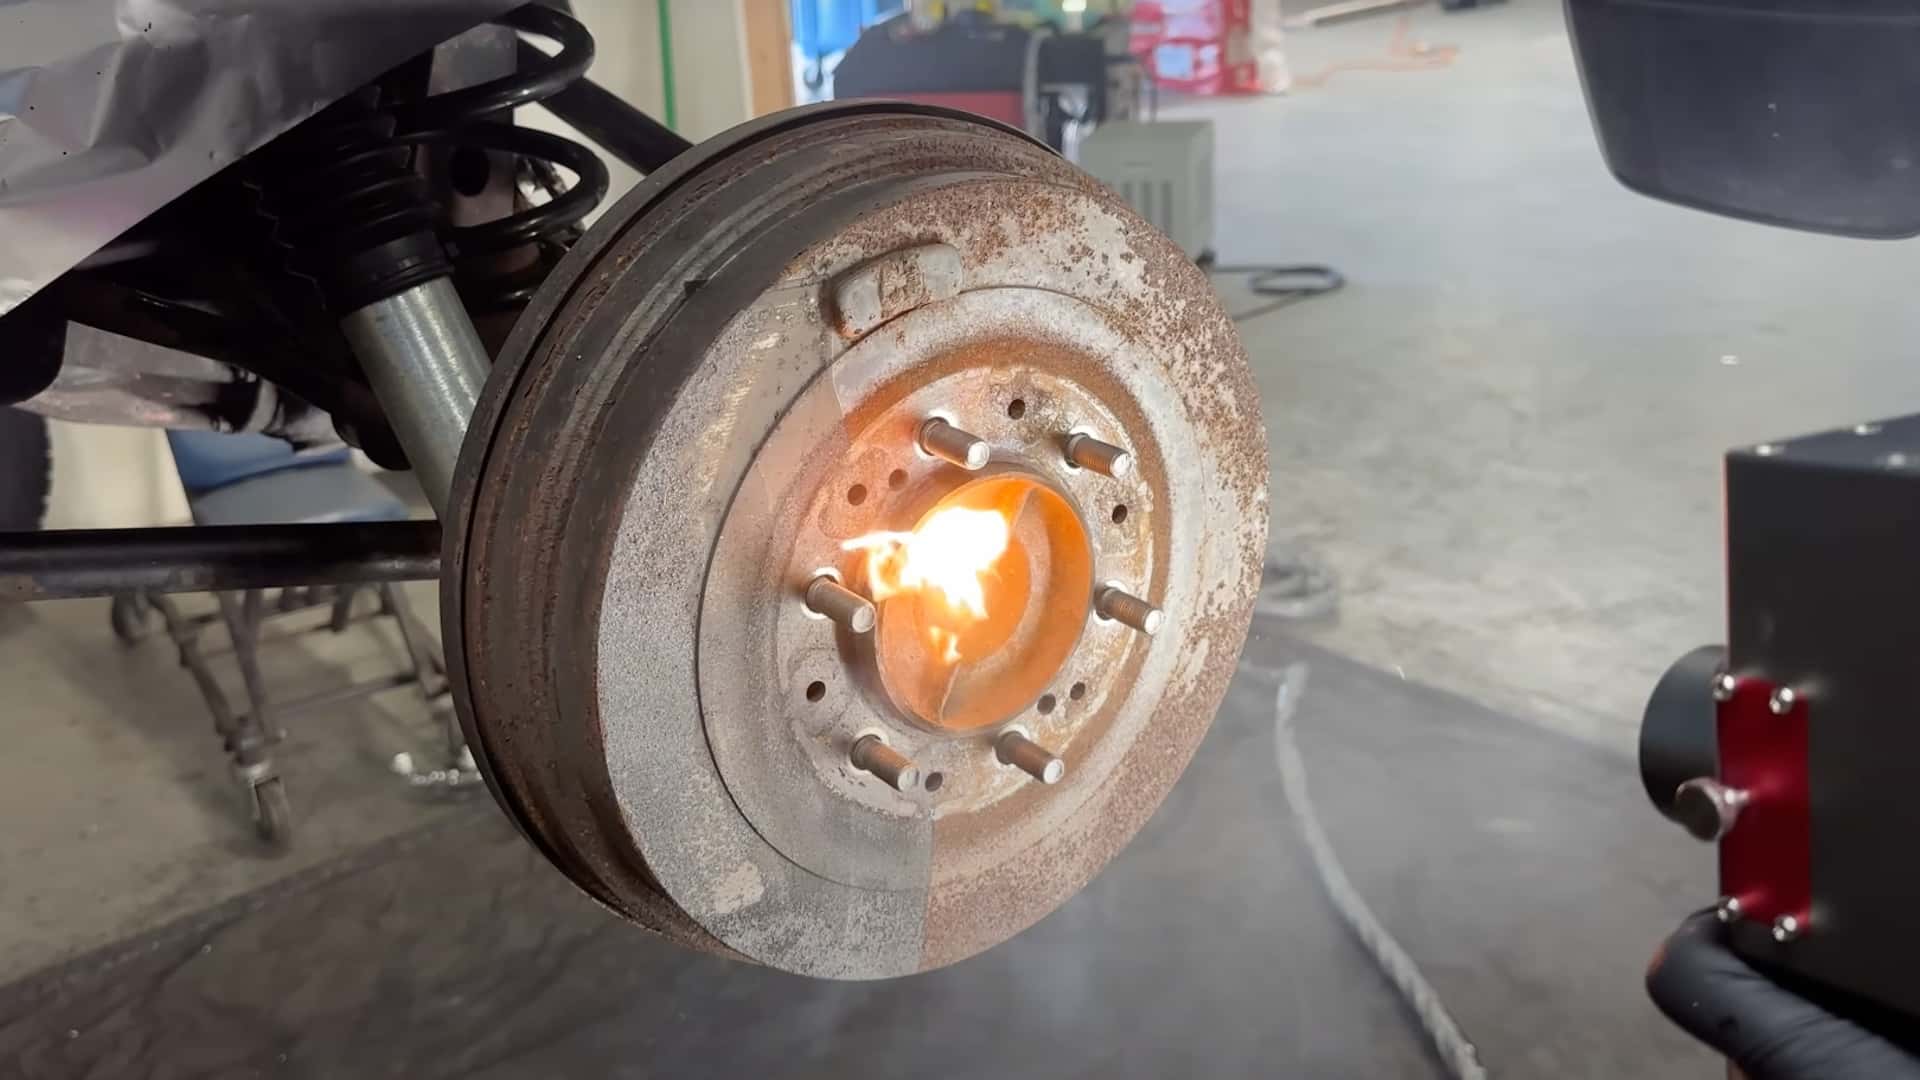 lasers are the most satisfying way to remove rust from a car